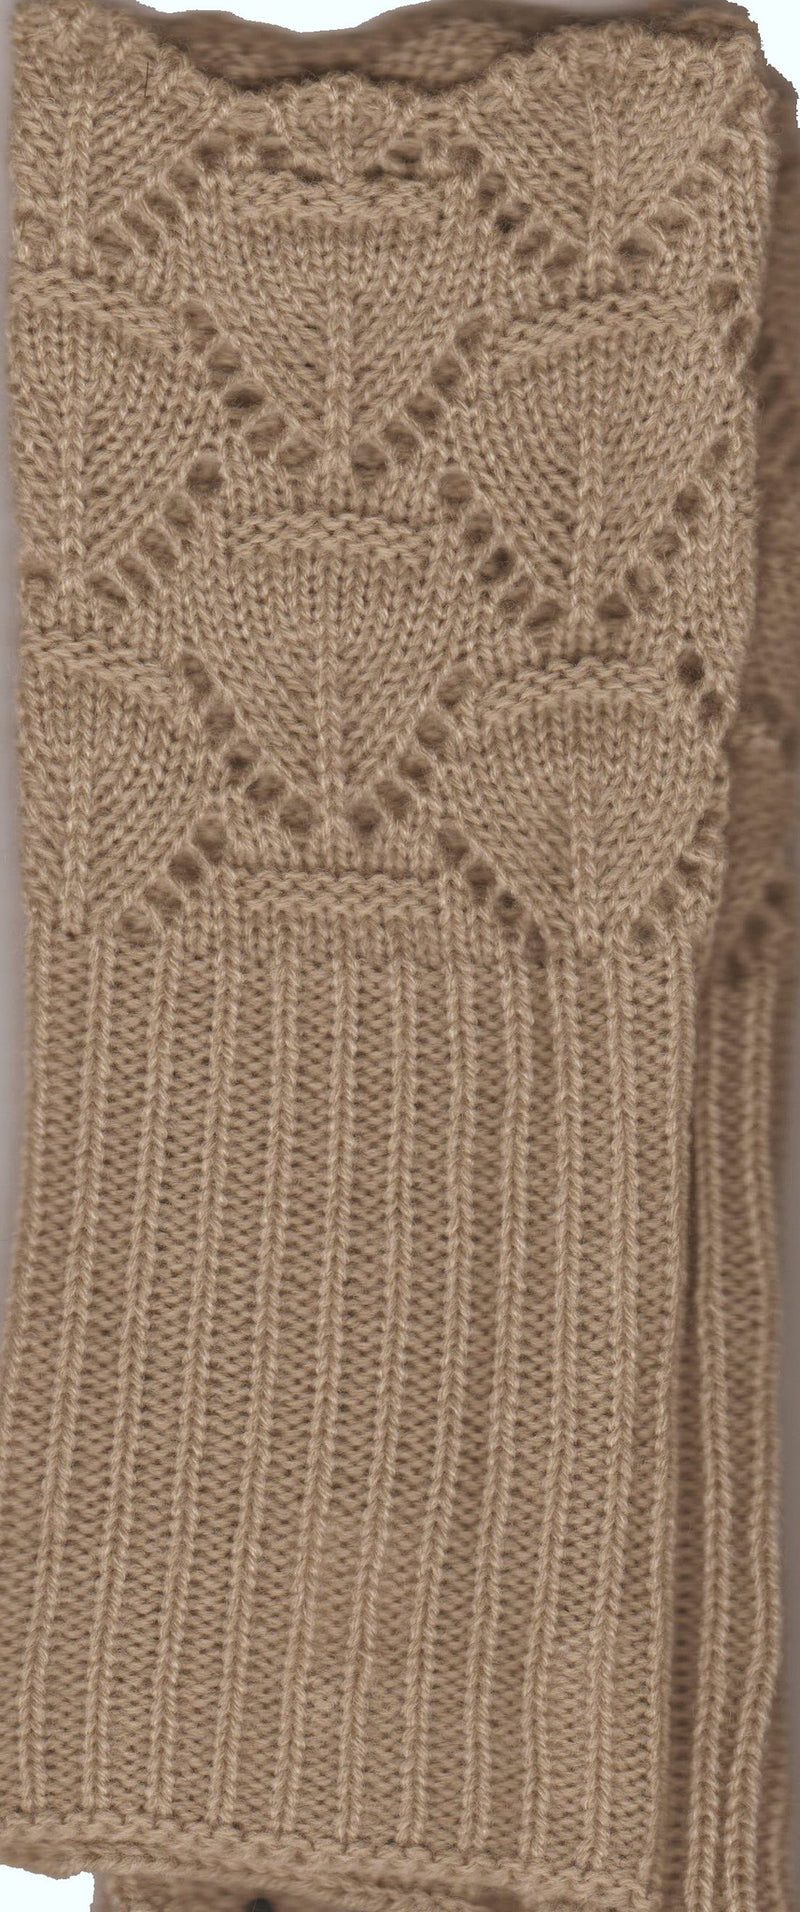 Camel Lace and Scallop Edge Design Lauer Glove for Petite Hands